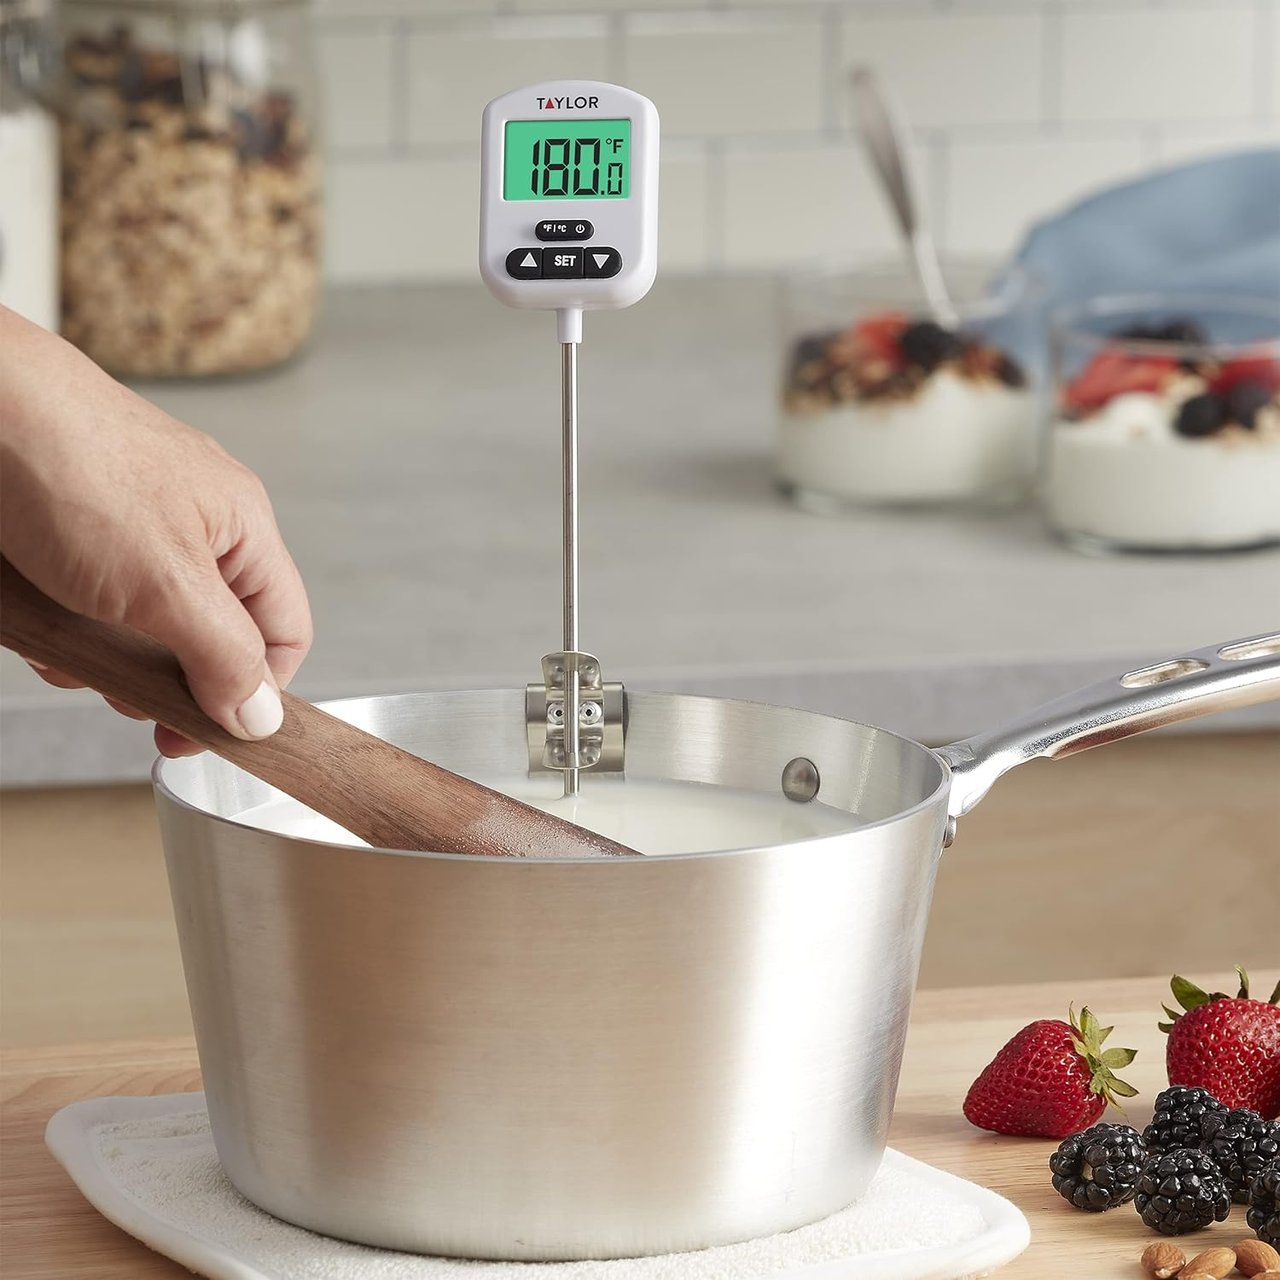 5 Taylor Programmable Digital Candy and Deep Fry Thermometer with Green Light Alert Display and Adjustable Pan Clip